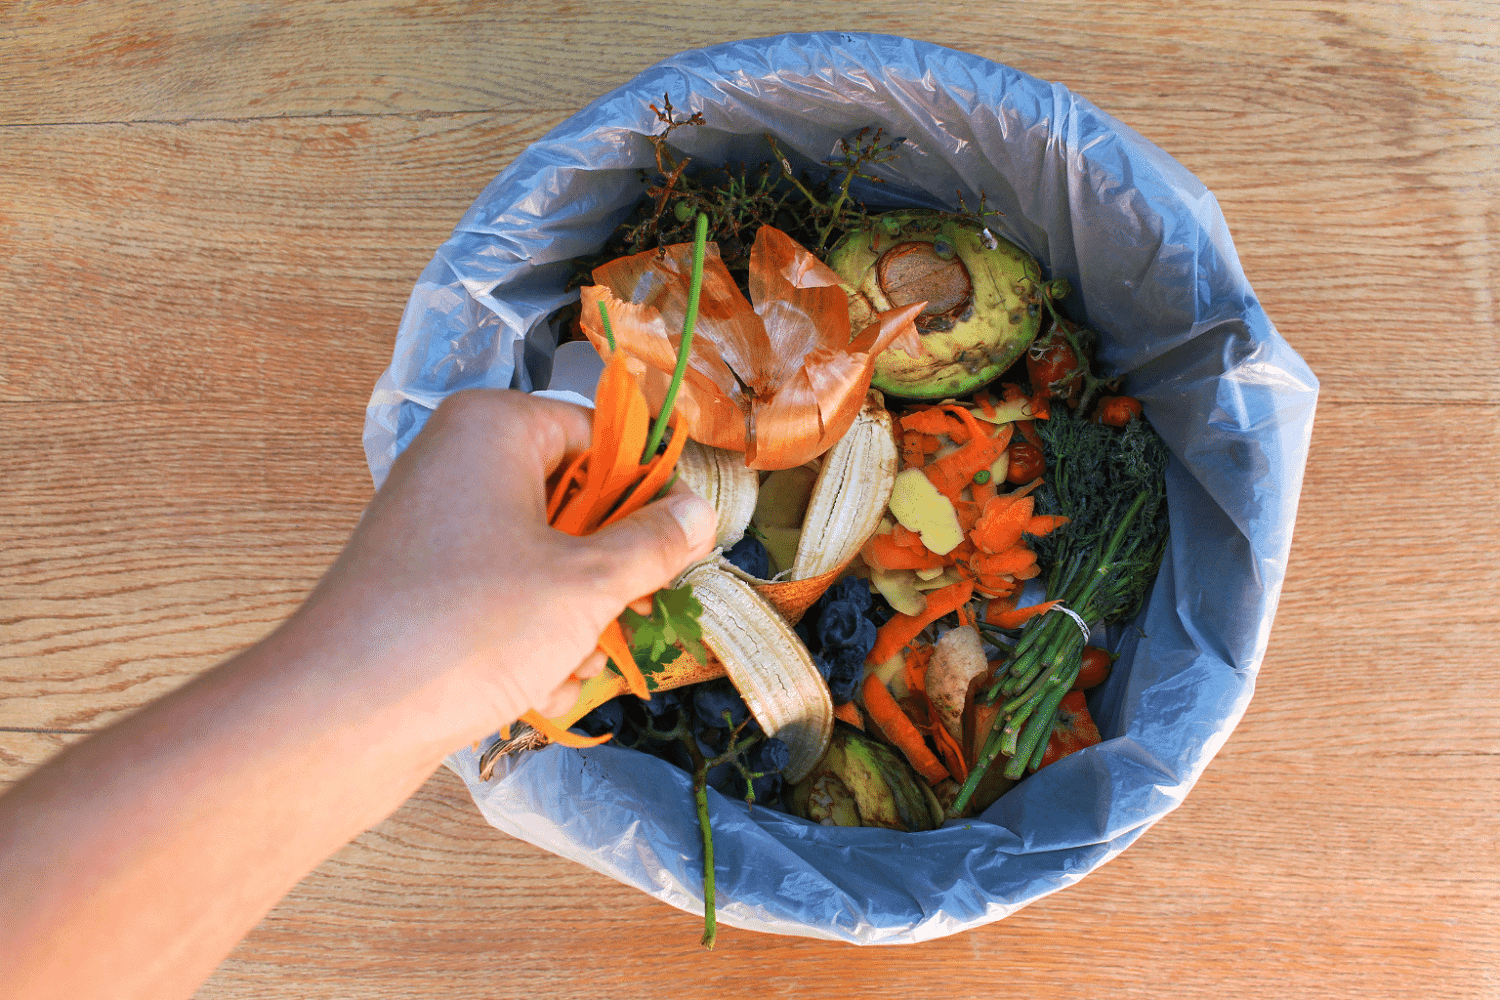 Why does composting matter?